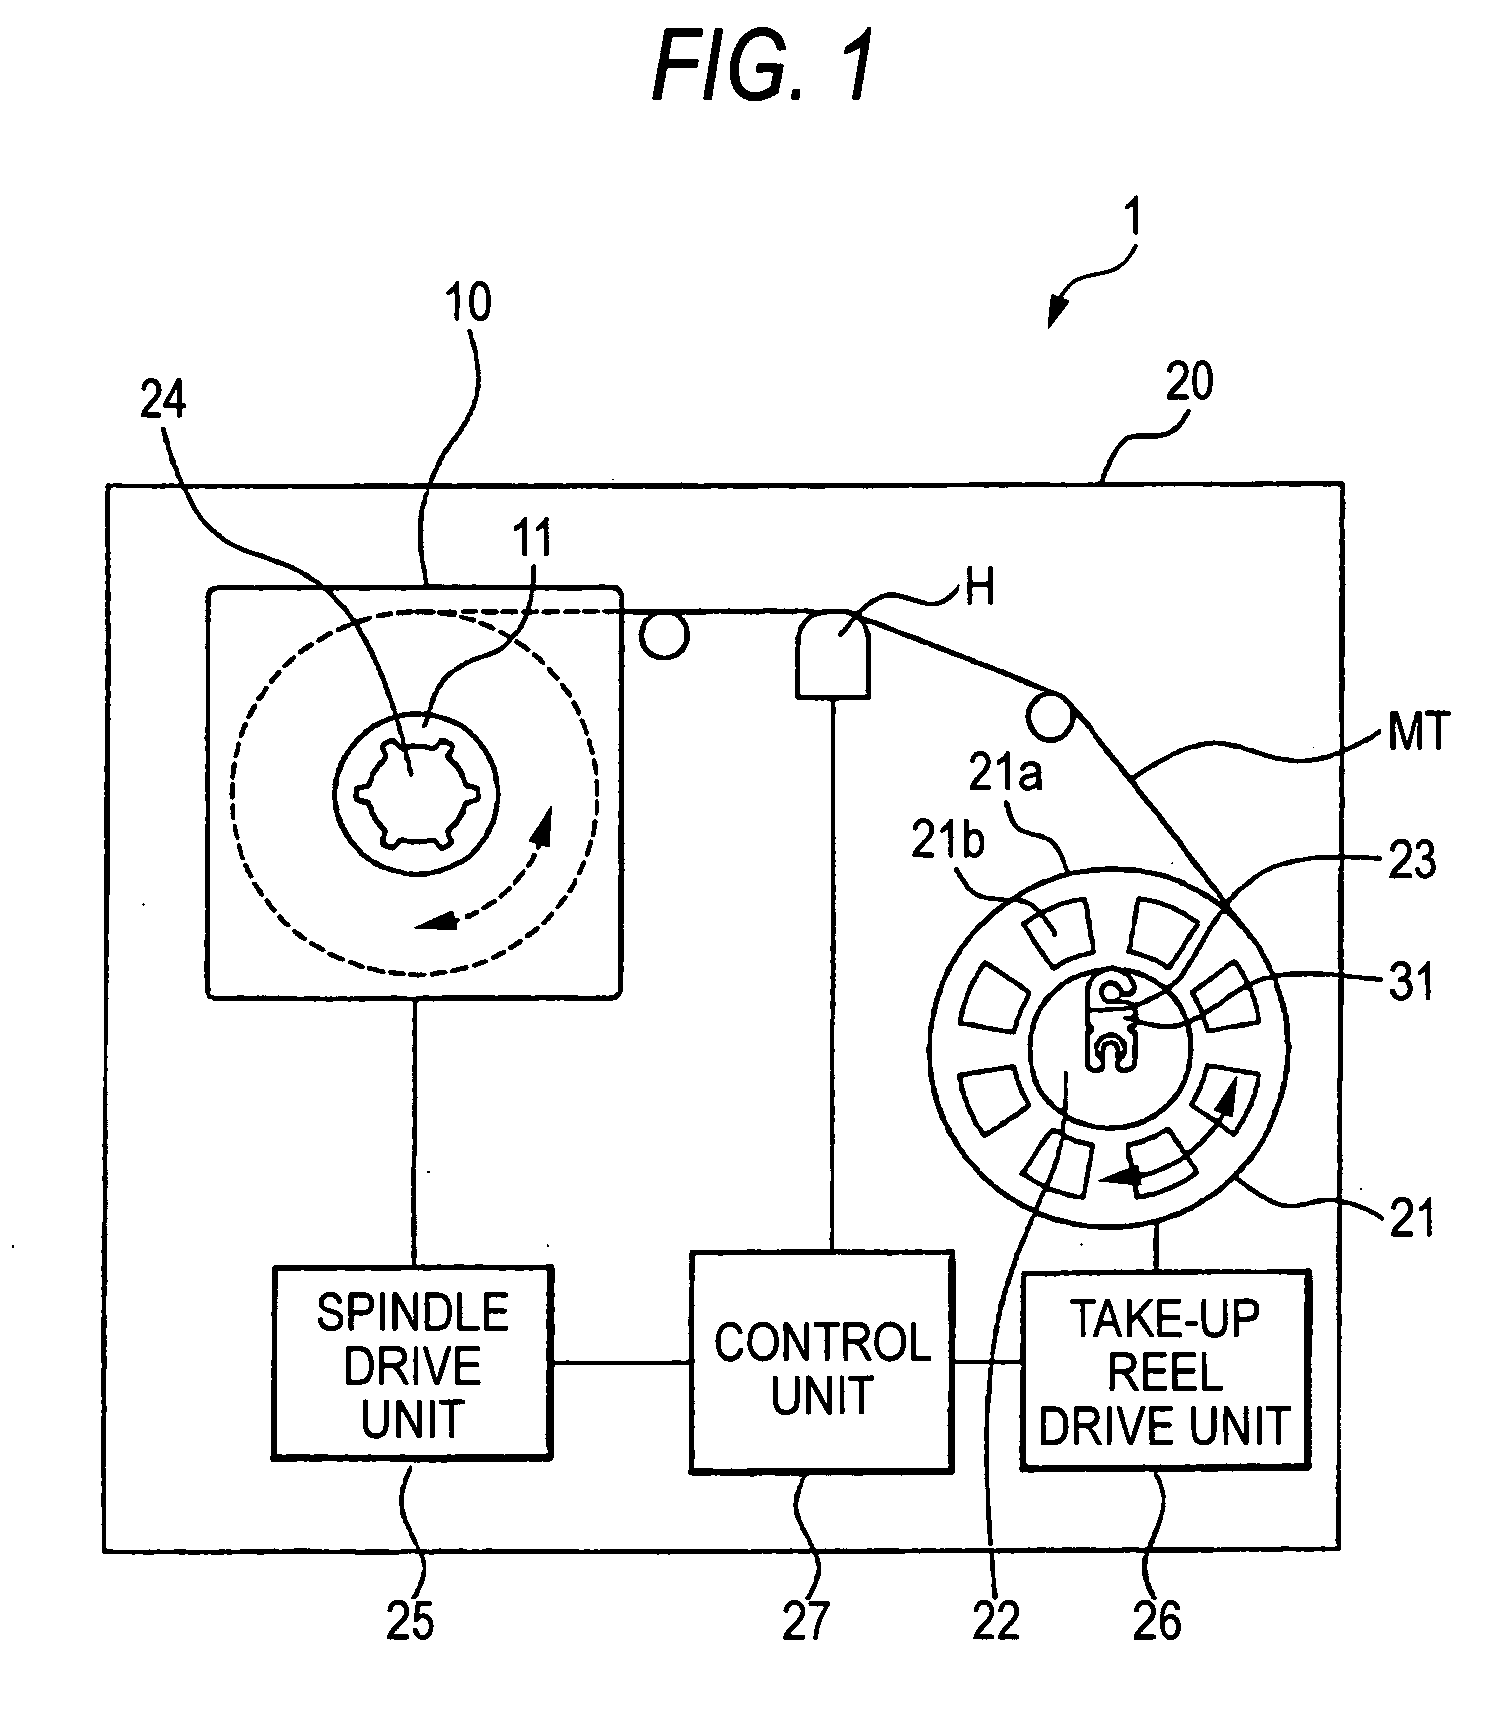 Leader Tape and Magnetic Tape Cartridge Using the Same